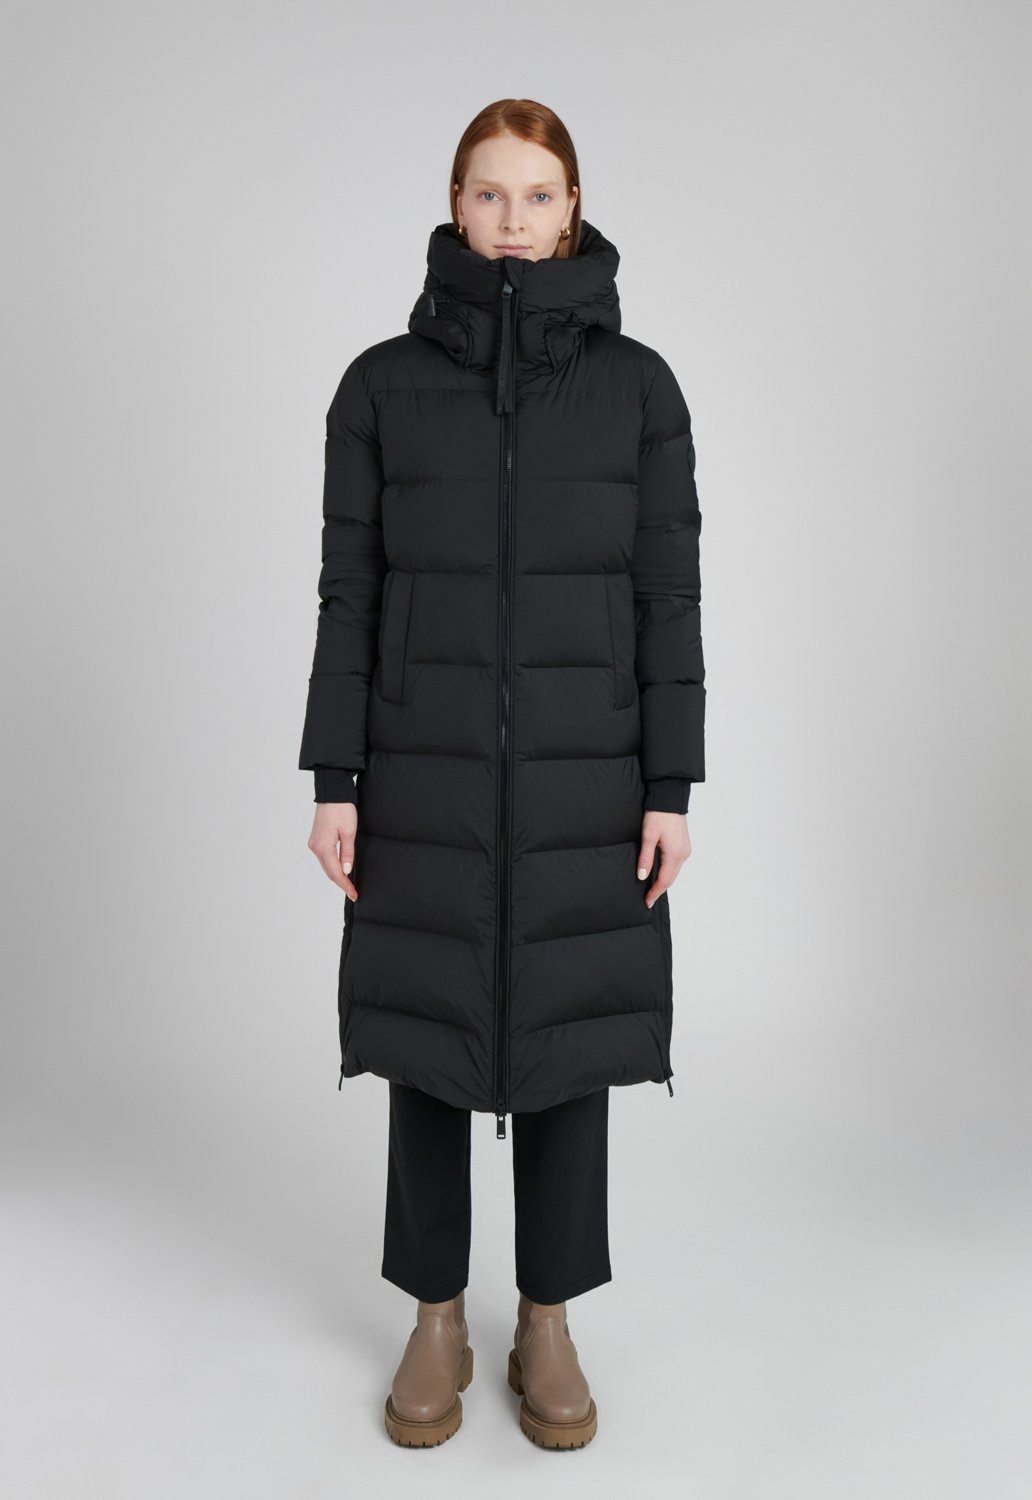 The Recycled Planet Womens Nora Hooded Storm Coat